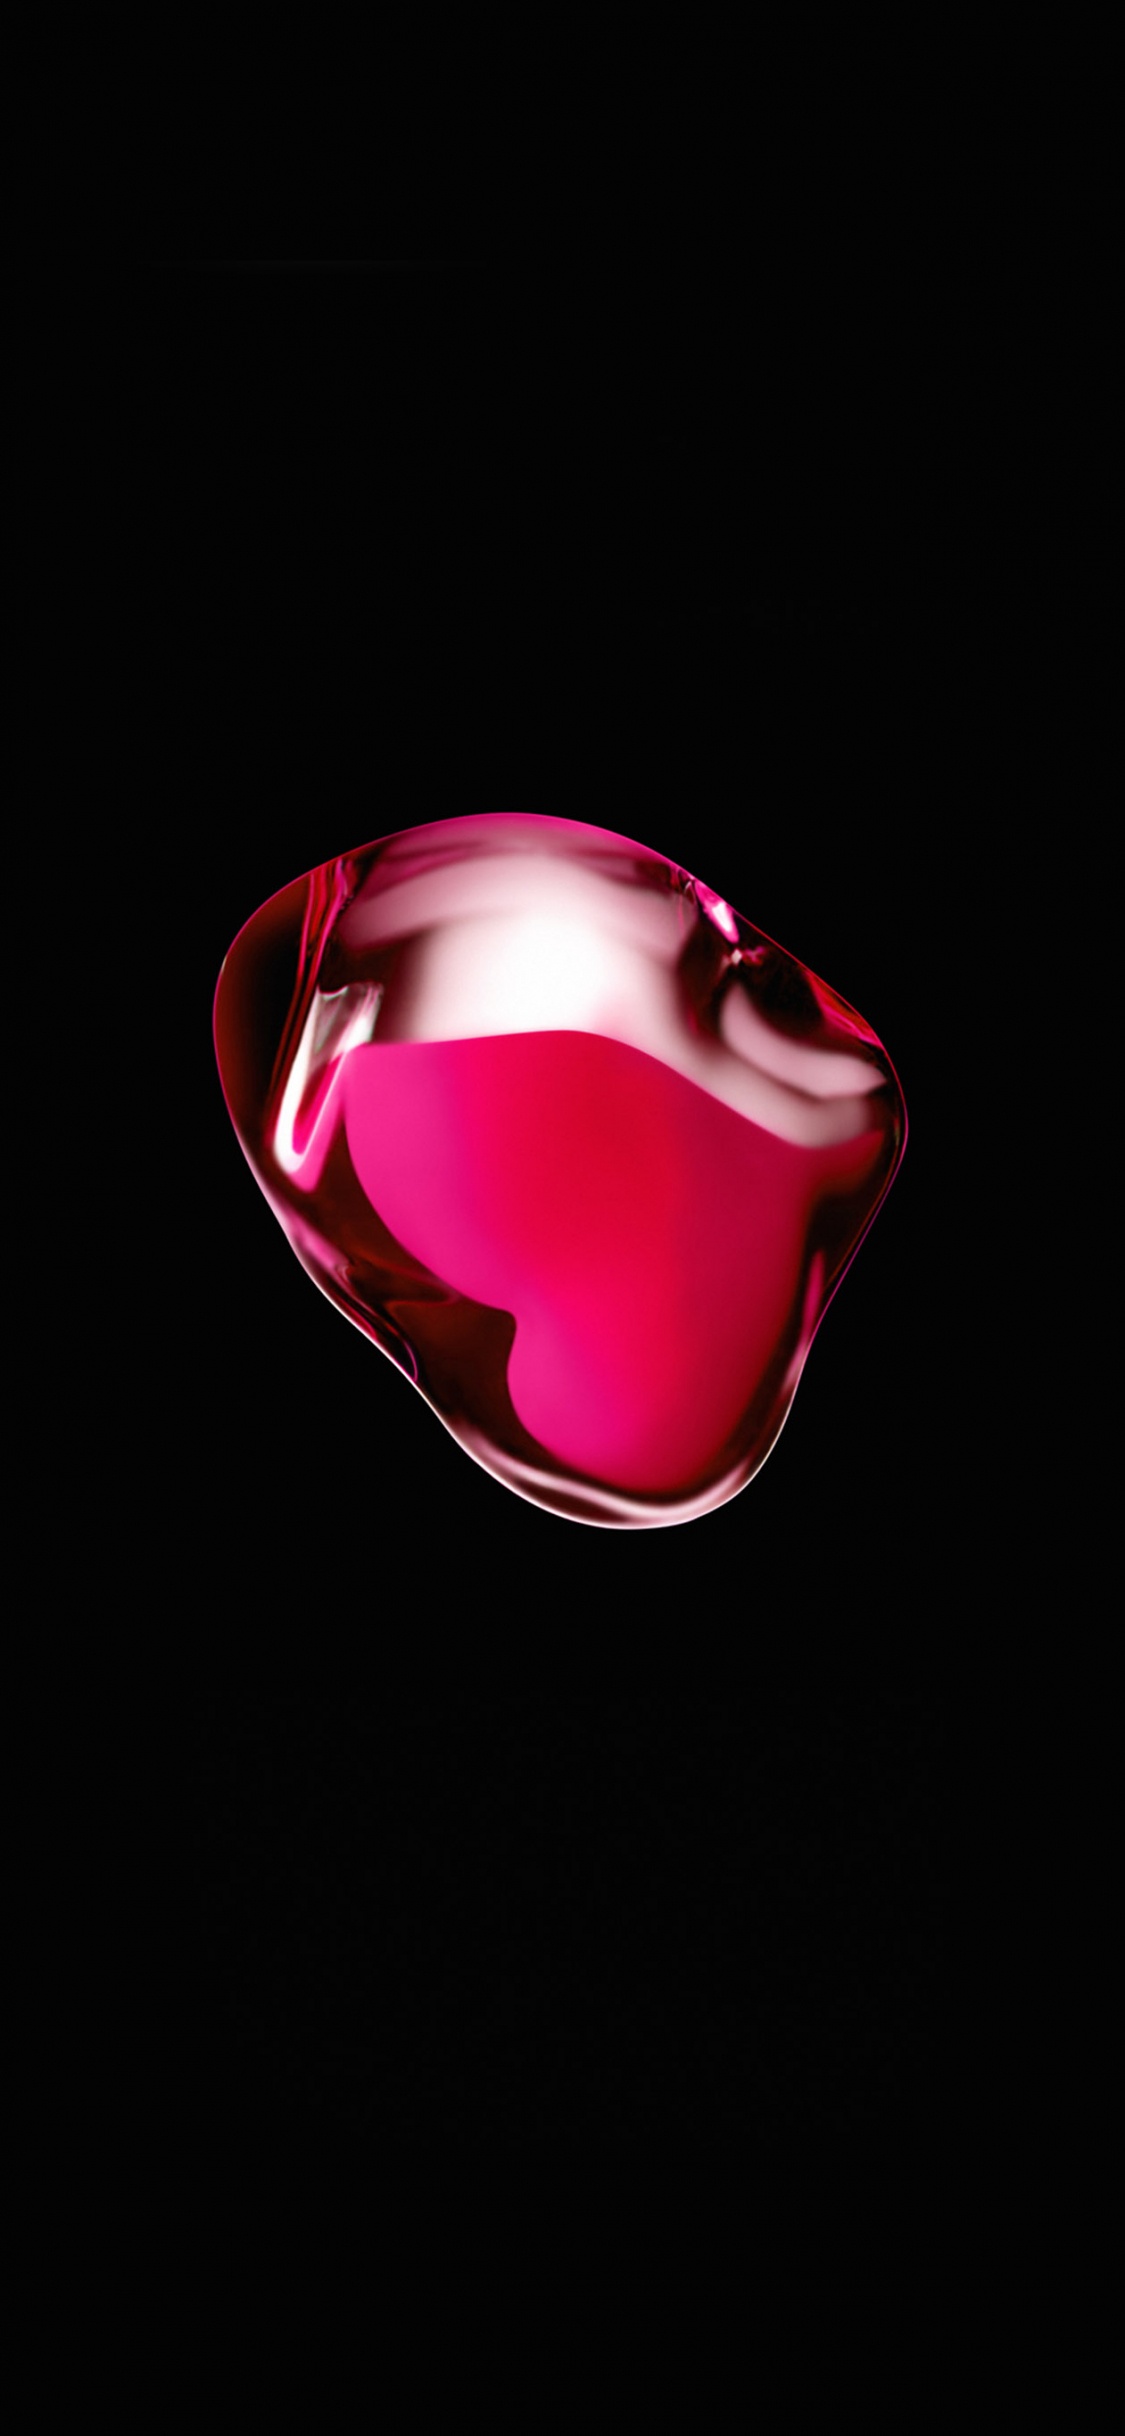 Pink and Silver Heart Ornament. Wallpaper in 1125x2436 Resolution